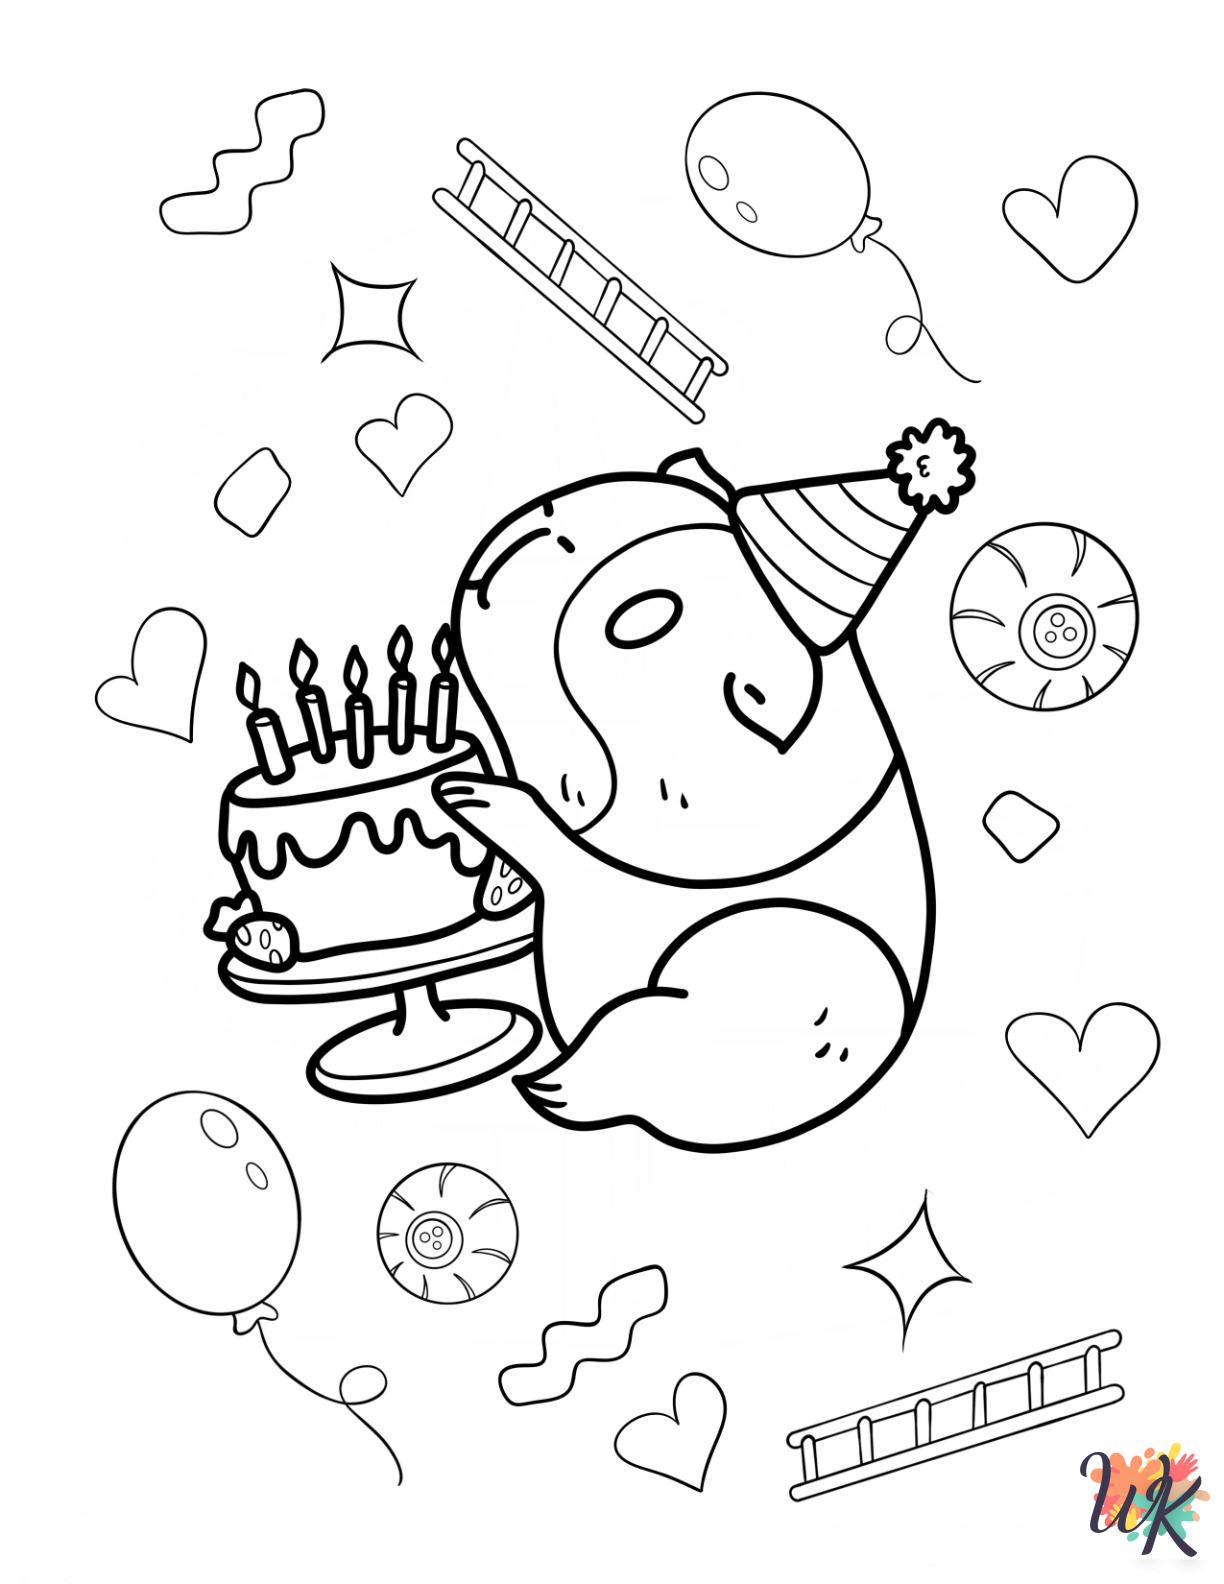 Guinea Pig free coloring pages